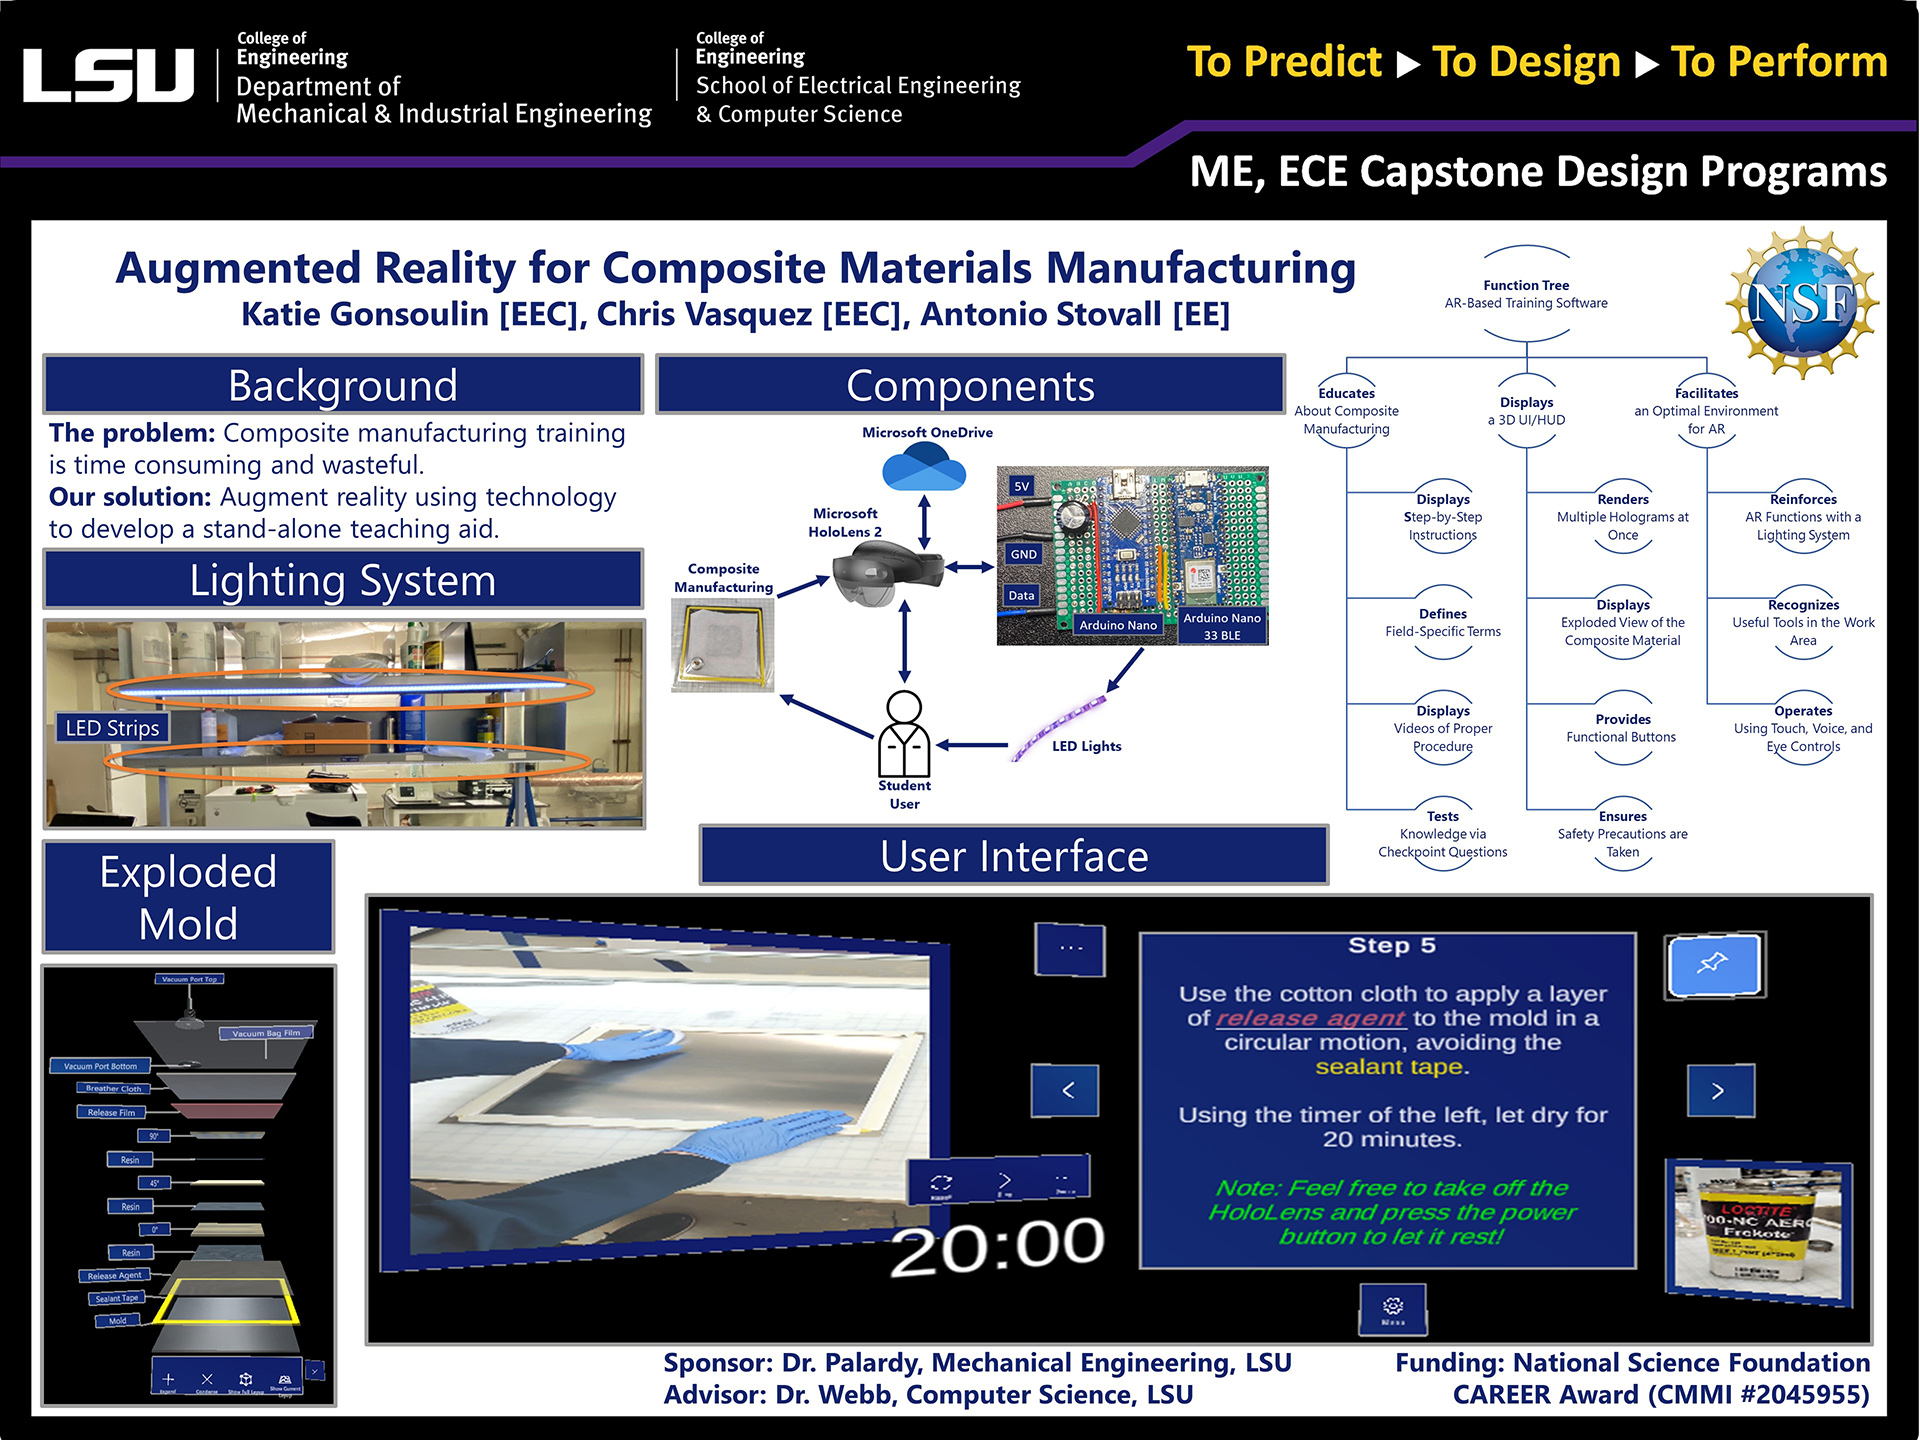 Project 59: Augmented Reality for Composite Materials Manufacturing (2022)